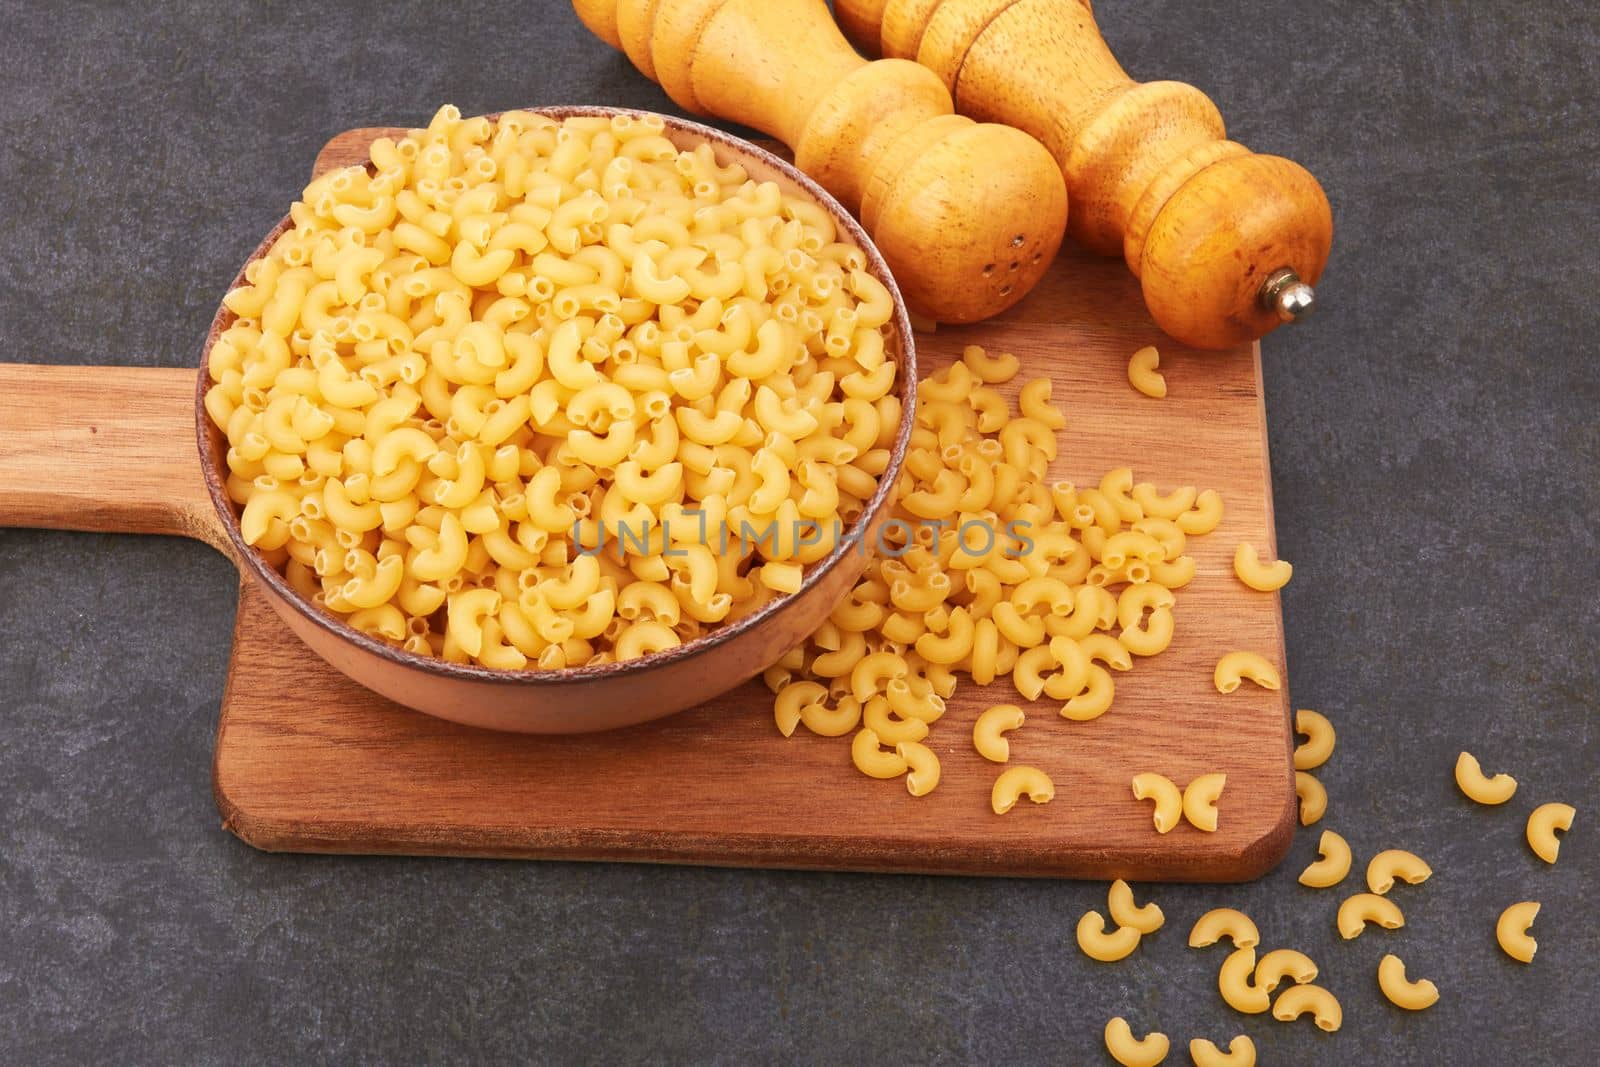 Elbow macaroni in bowl by pioneer111